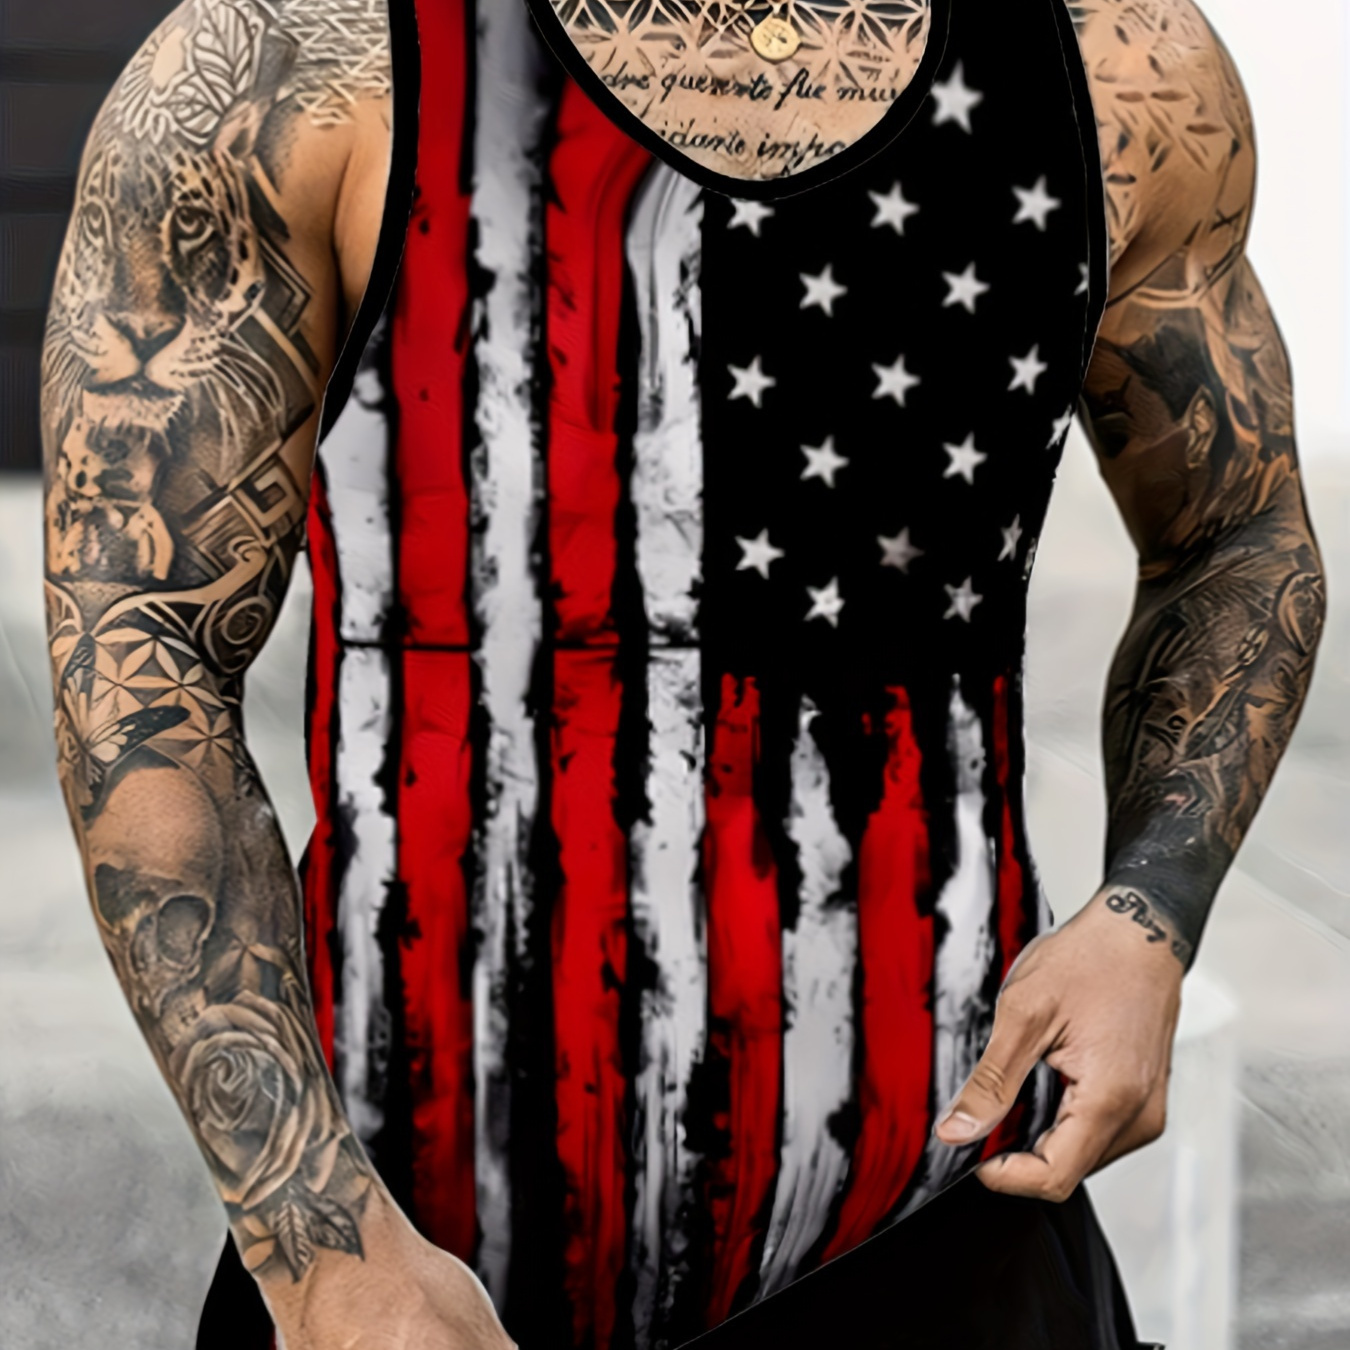 

Us Flag Print A-shirt Tanks, Sleeveless Tank Top, Lightweight Active Undershirts, For Workout At The Gym, Bodybuilding, And Fitness, As Gifts